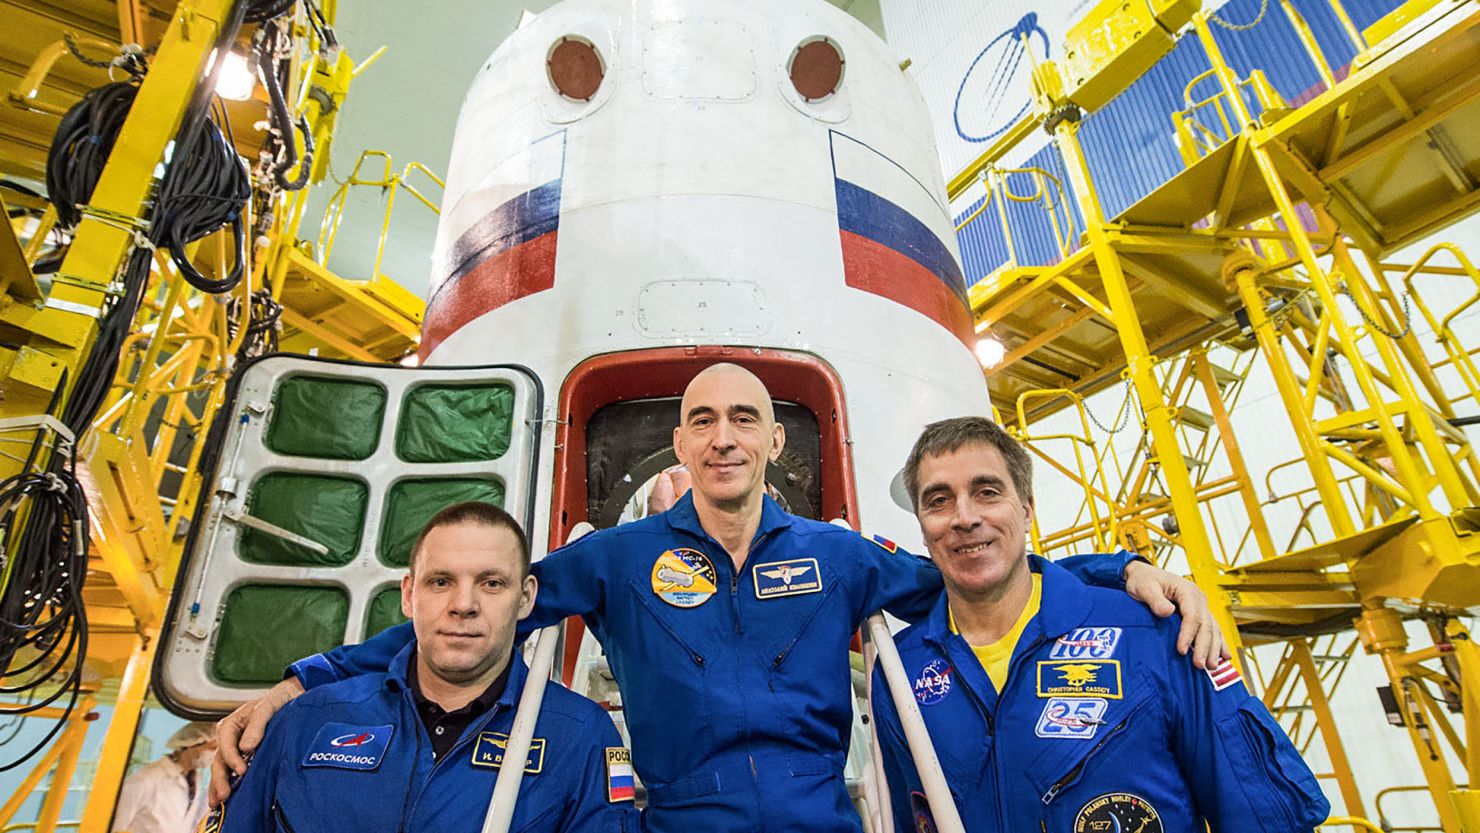 At the Baikonur Cosmodrome in Kazakhstan, Expedition 63 crewmembers Ivan Vagner (left) and Anatoly Ivanishin (center) of Roscosmos and Chris Cassidy (right) of NASA pose for pictures on April 3 in front of their Soyuz spacecraft as part of their pre-launch activities. 